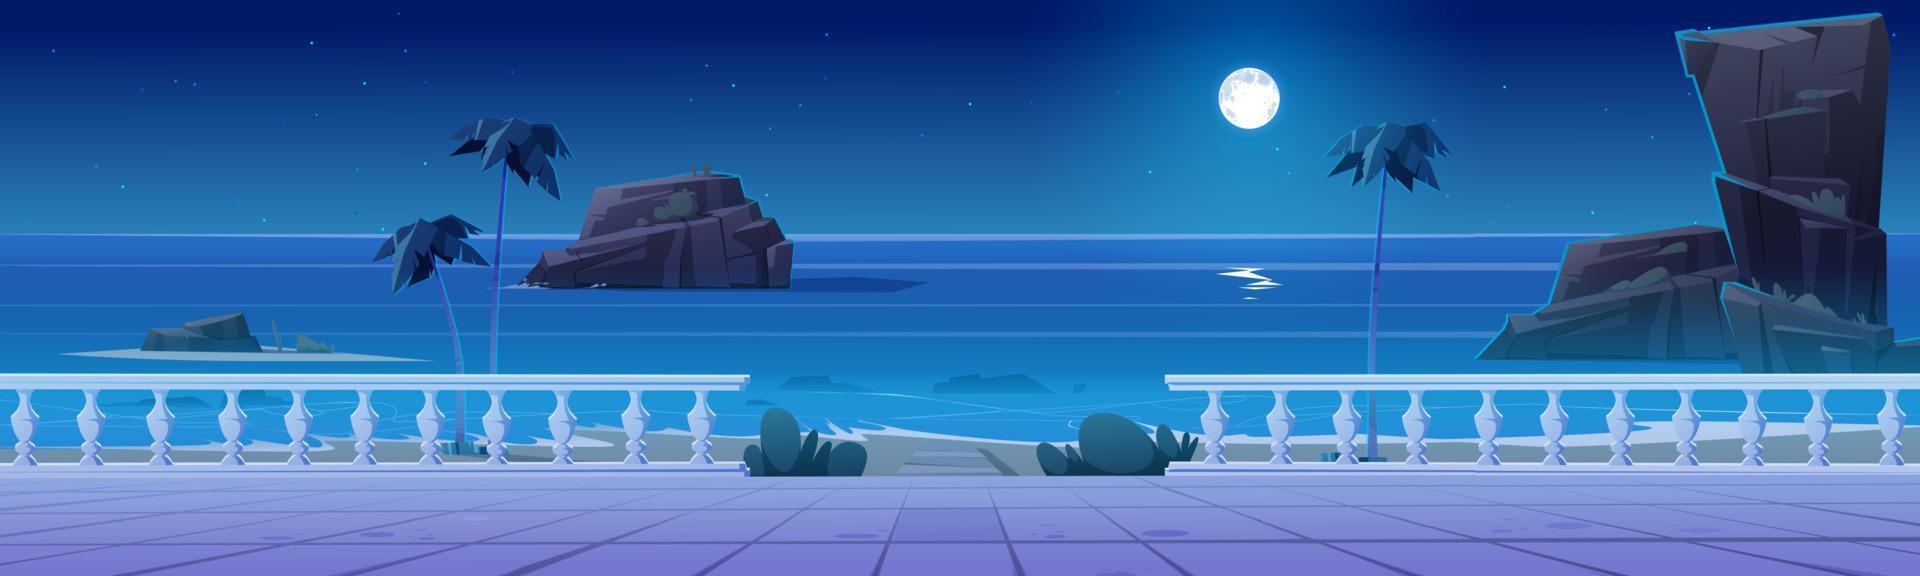 Summer seafront on tropical beach at night vector